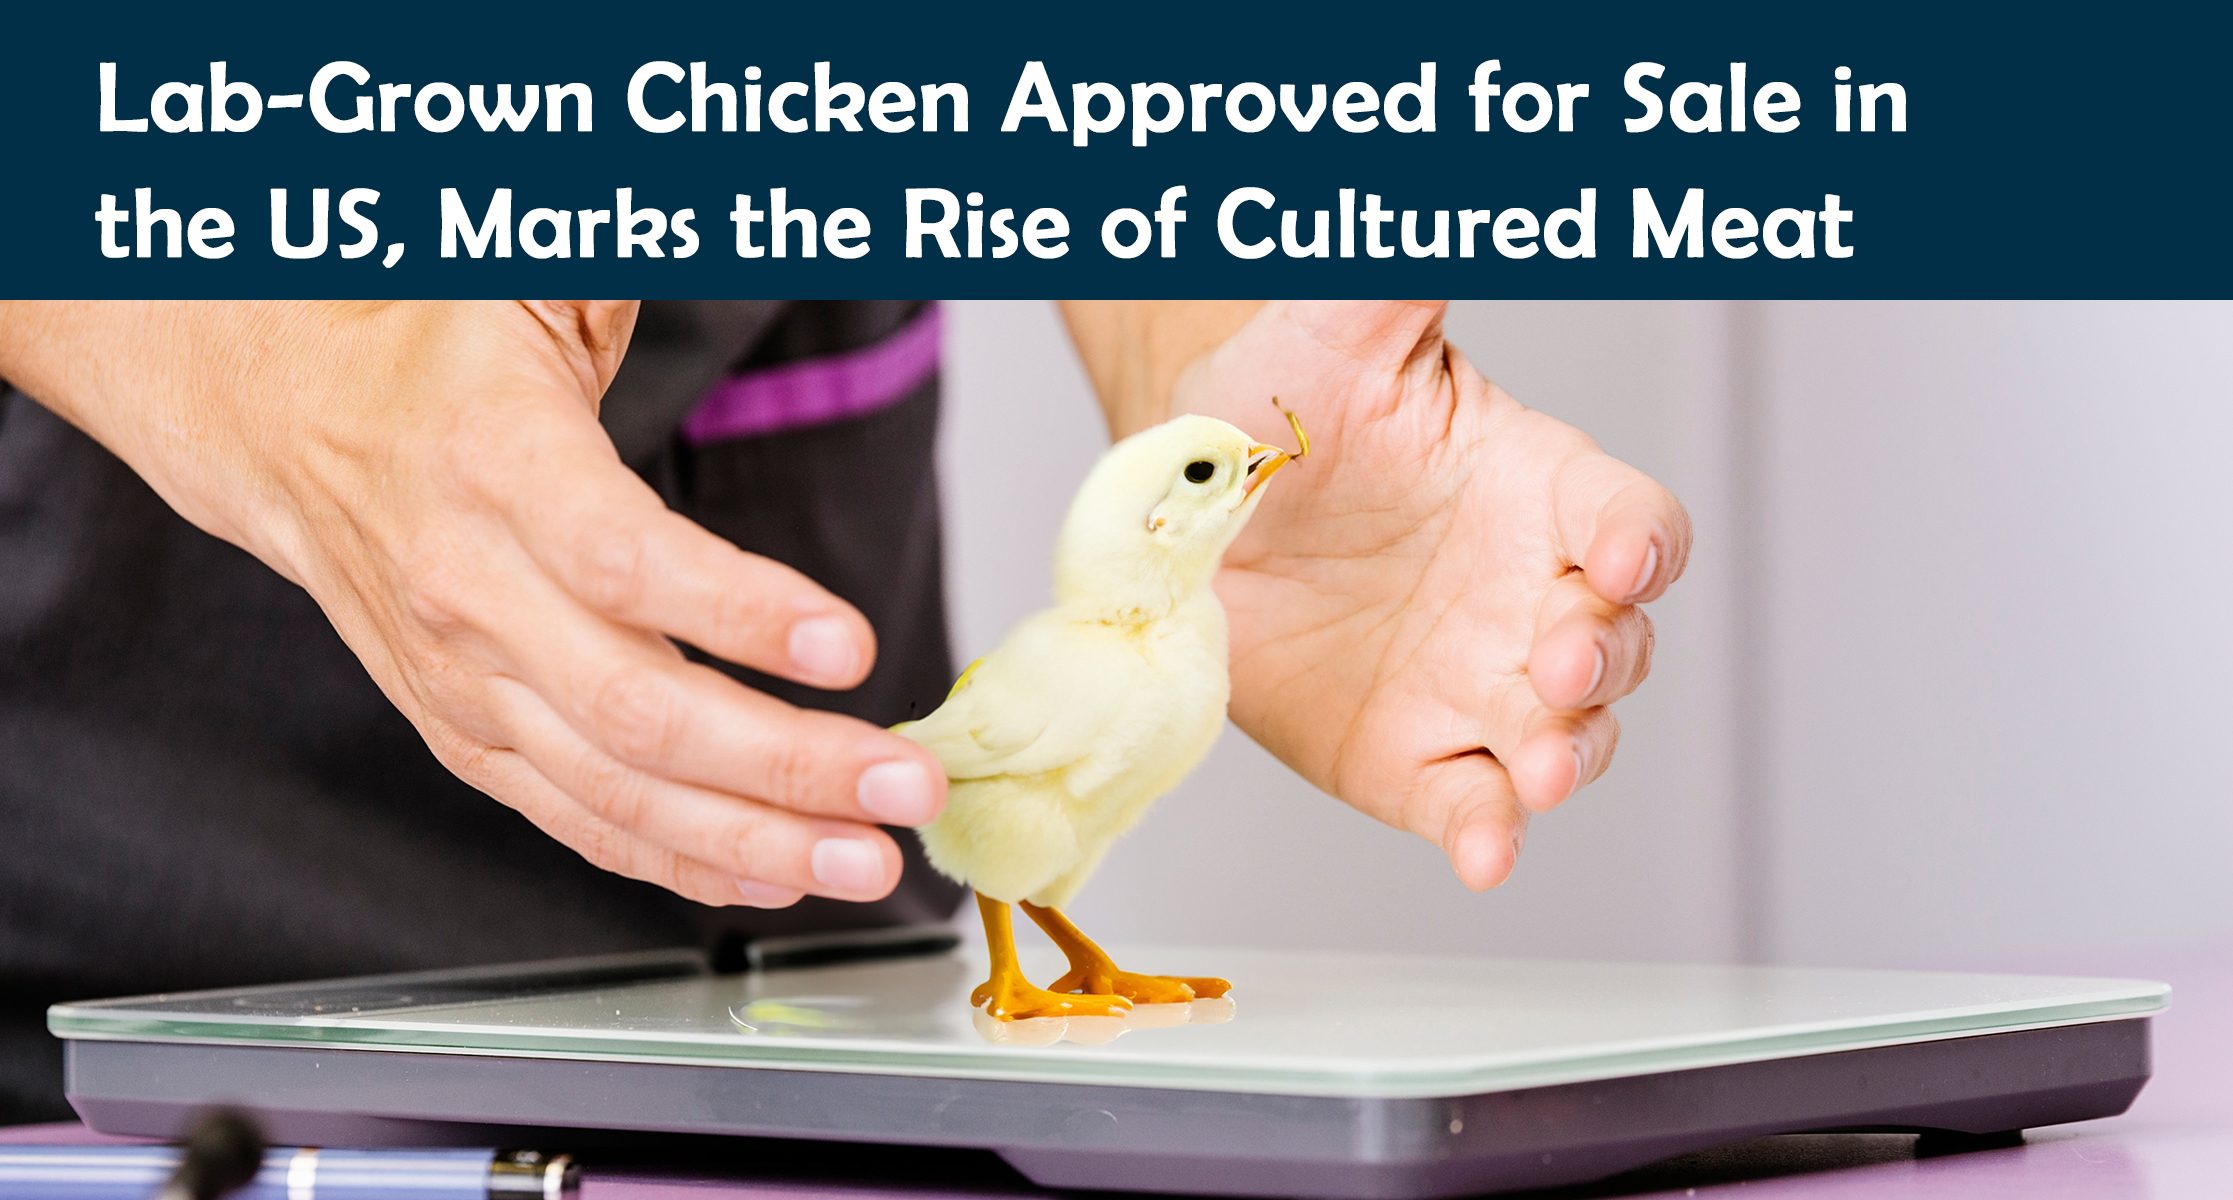 Lab-Grown Chicken Approved for Sale in the US, Marks the Rise of Cultured Meat